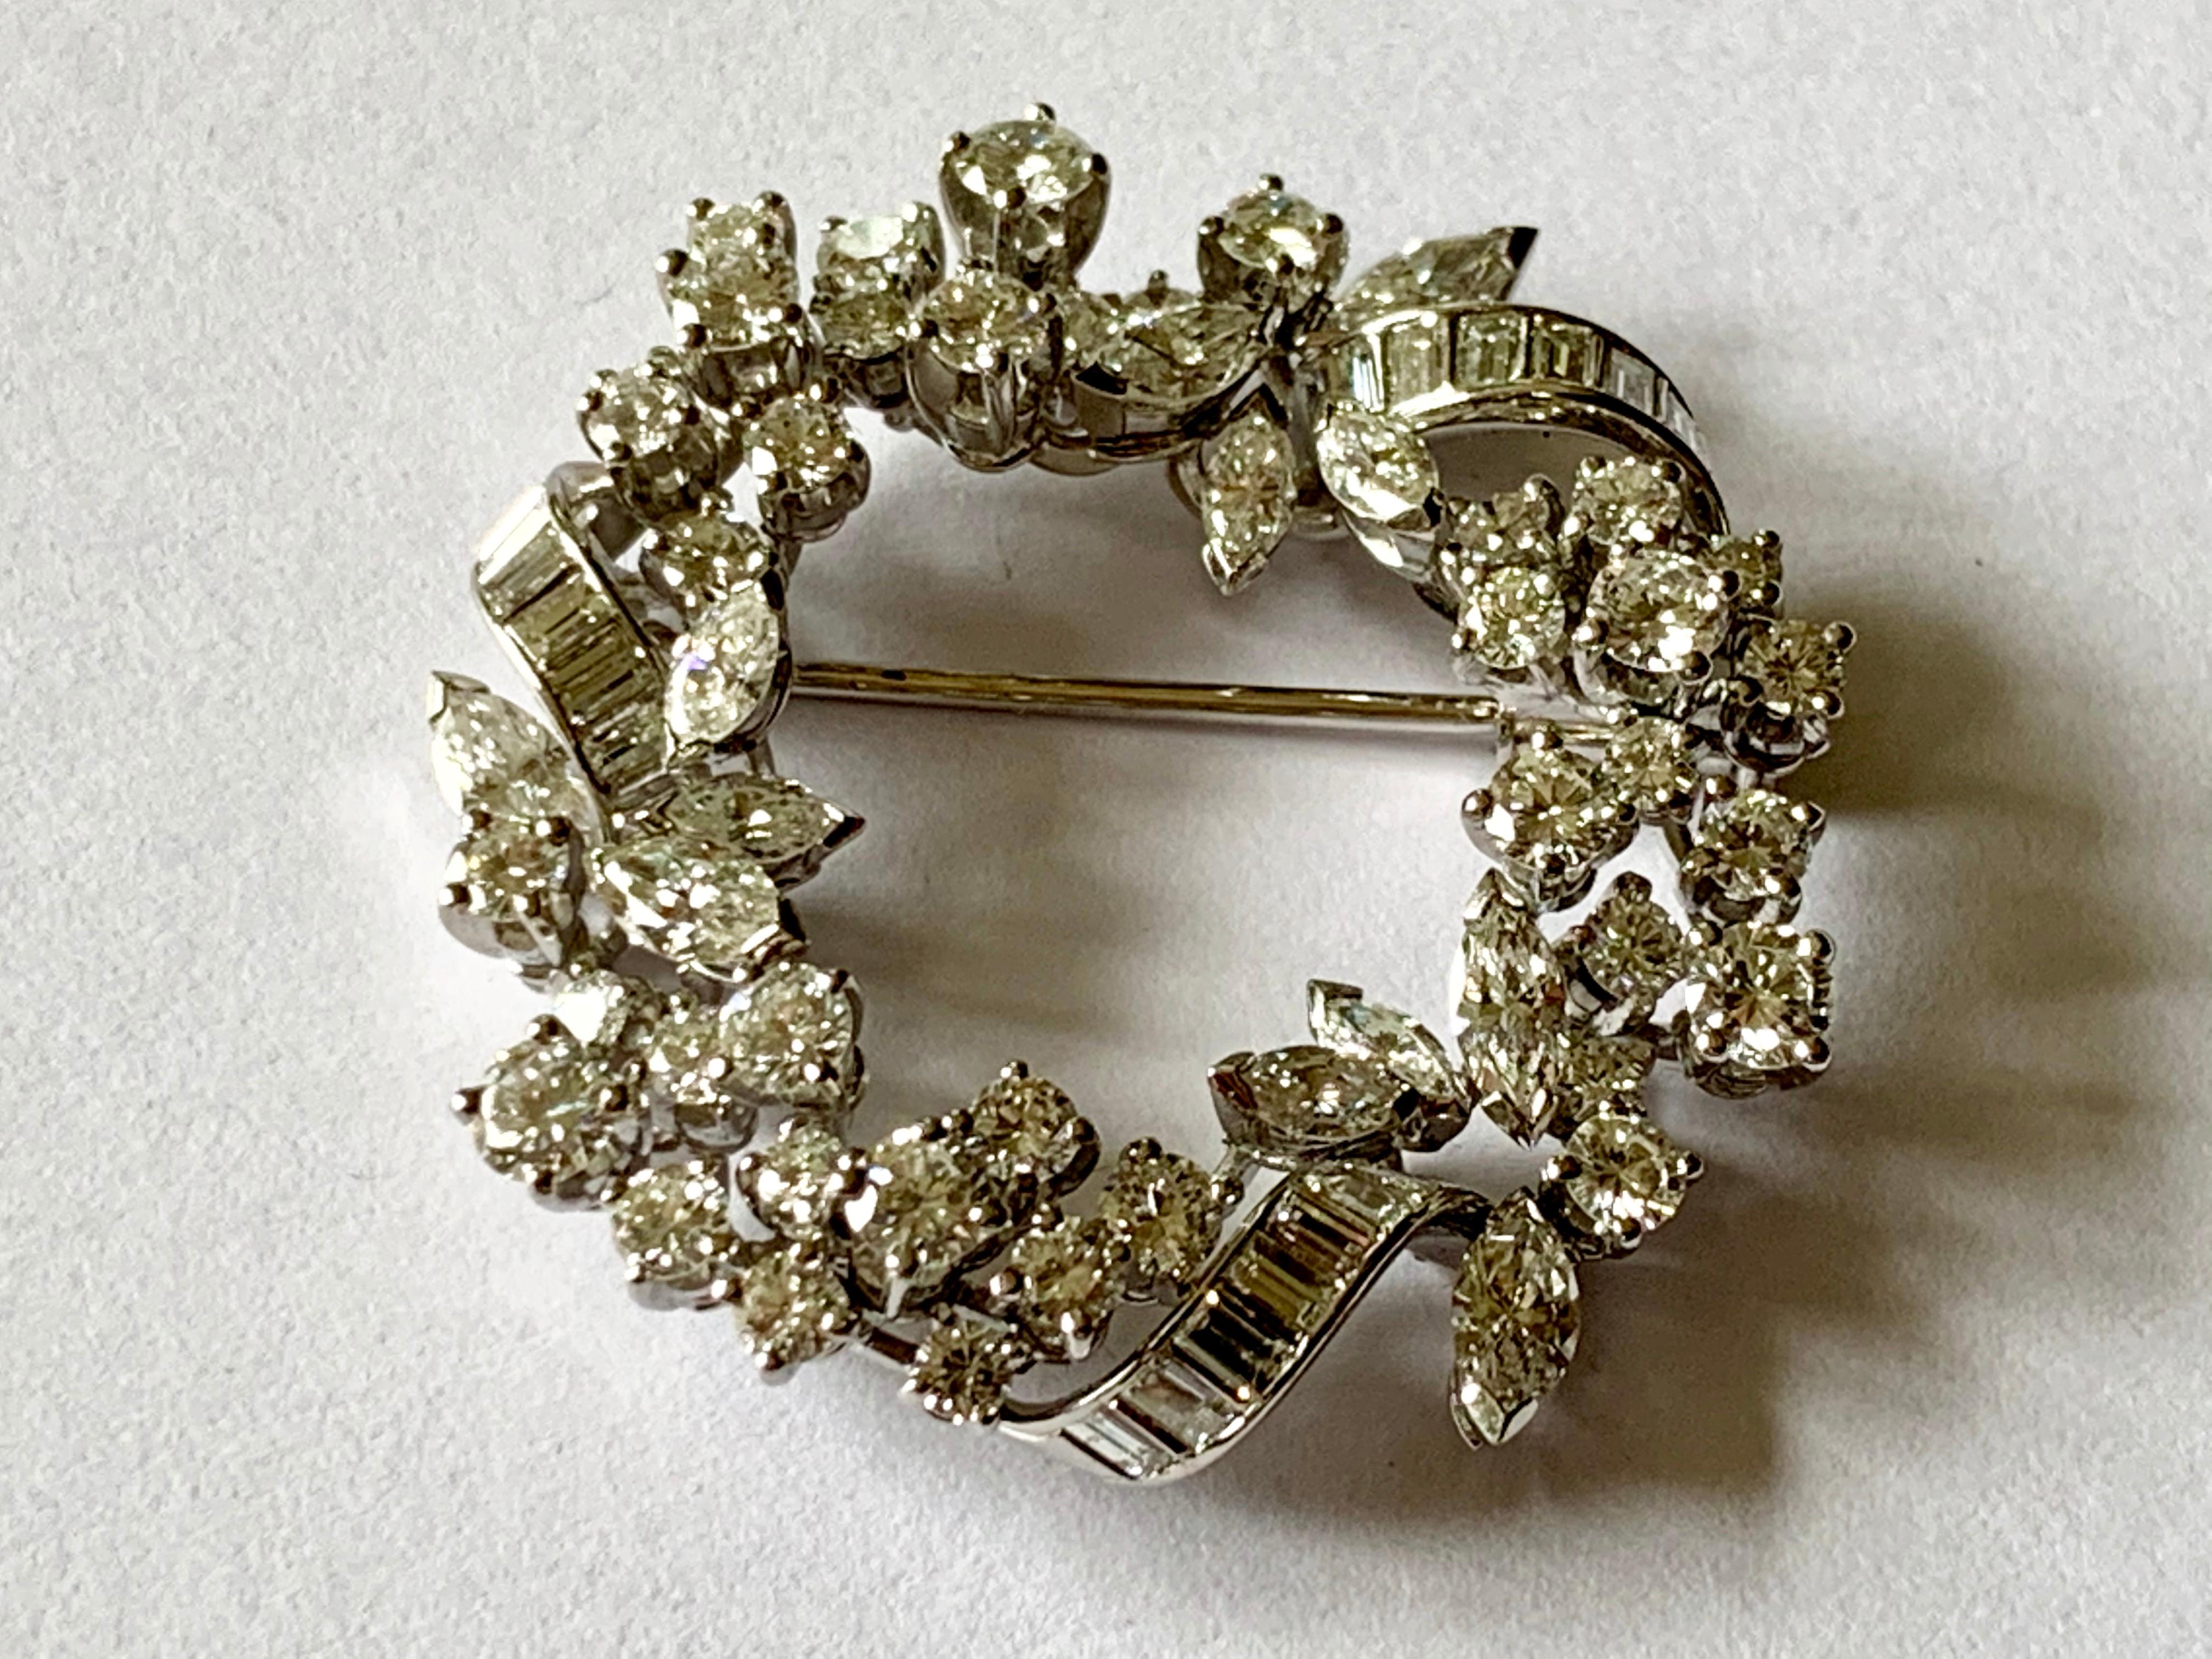 This gorgeous 18 K white Gold  brooch by the well known and established swiss company Meister is designed as a circular motif and contains 38 round brilliant diamonds, 12 Marquise Diamonds and 21 Baguette Diamonds with a total Diamond weight of